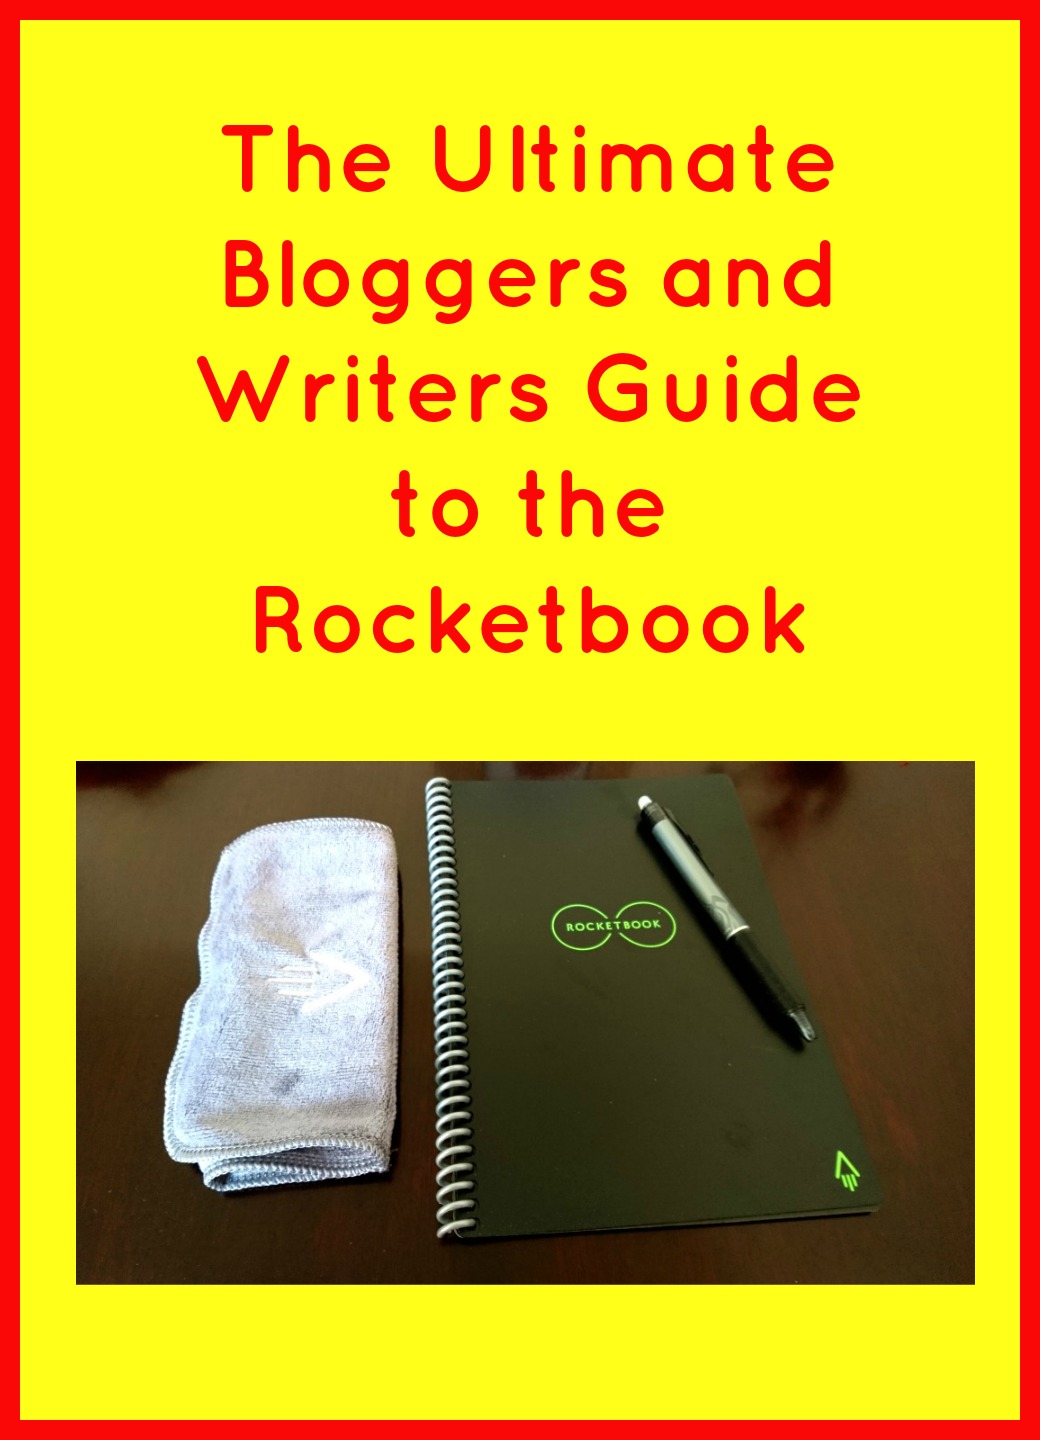 The Ultimate Bloggers and Writers Guide to the Rocketbook feature image